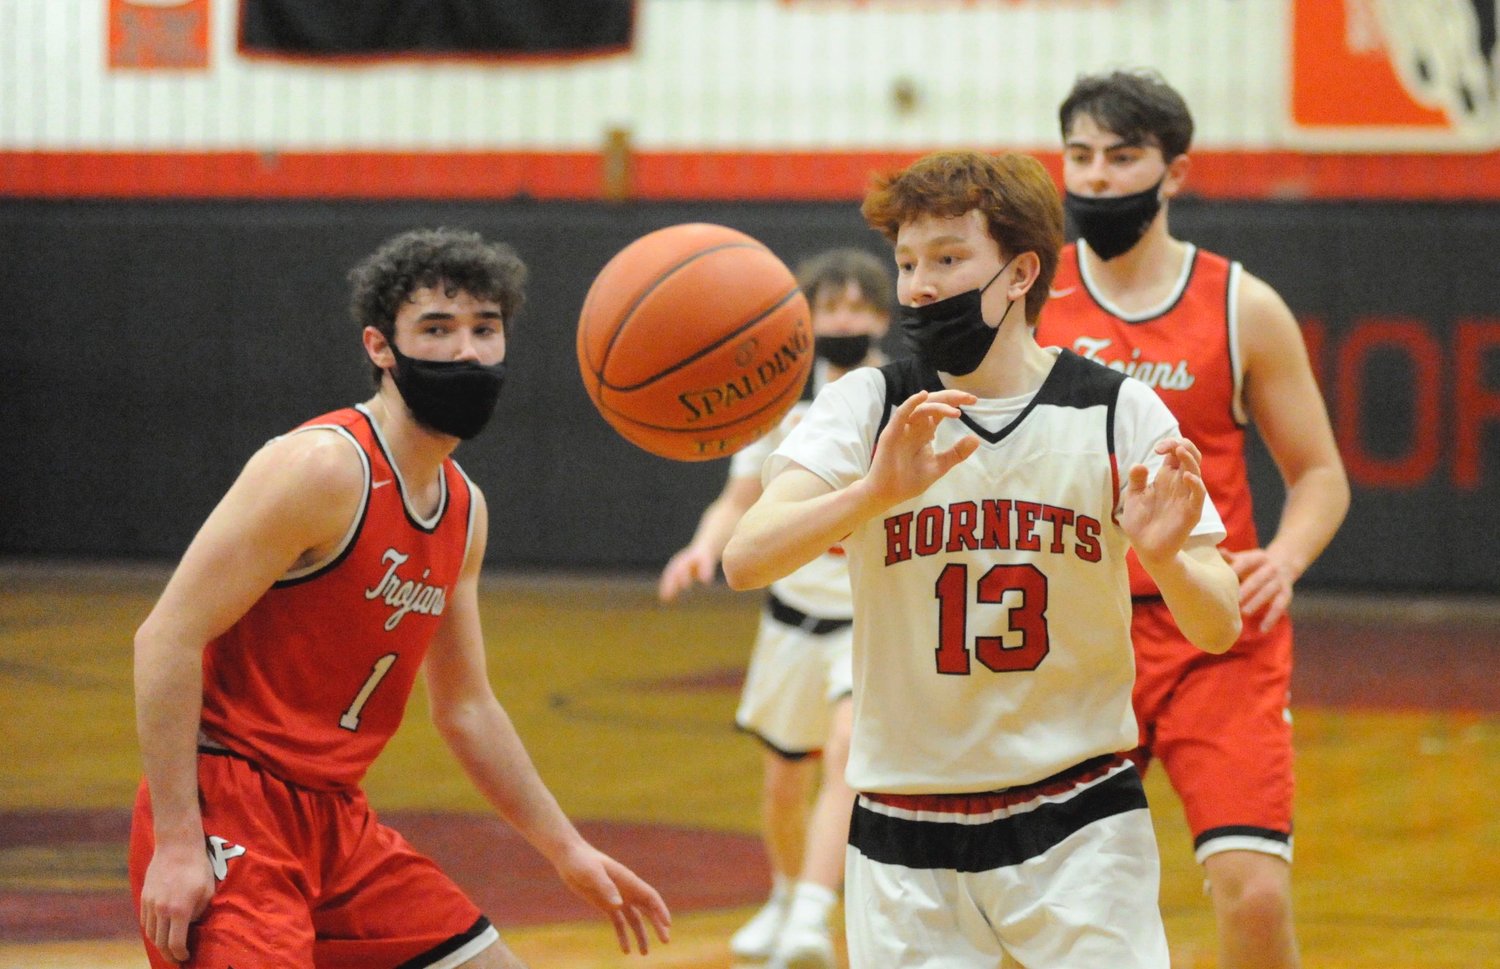 Mid-pass. Honesdale’s Chase Cummings passes to a teammate as Trojans’ Ryan Ruddy defends. Ruddy led all bucketeers with 19 points.